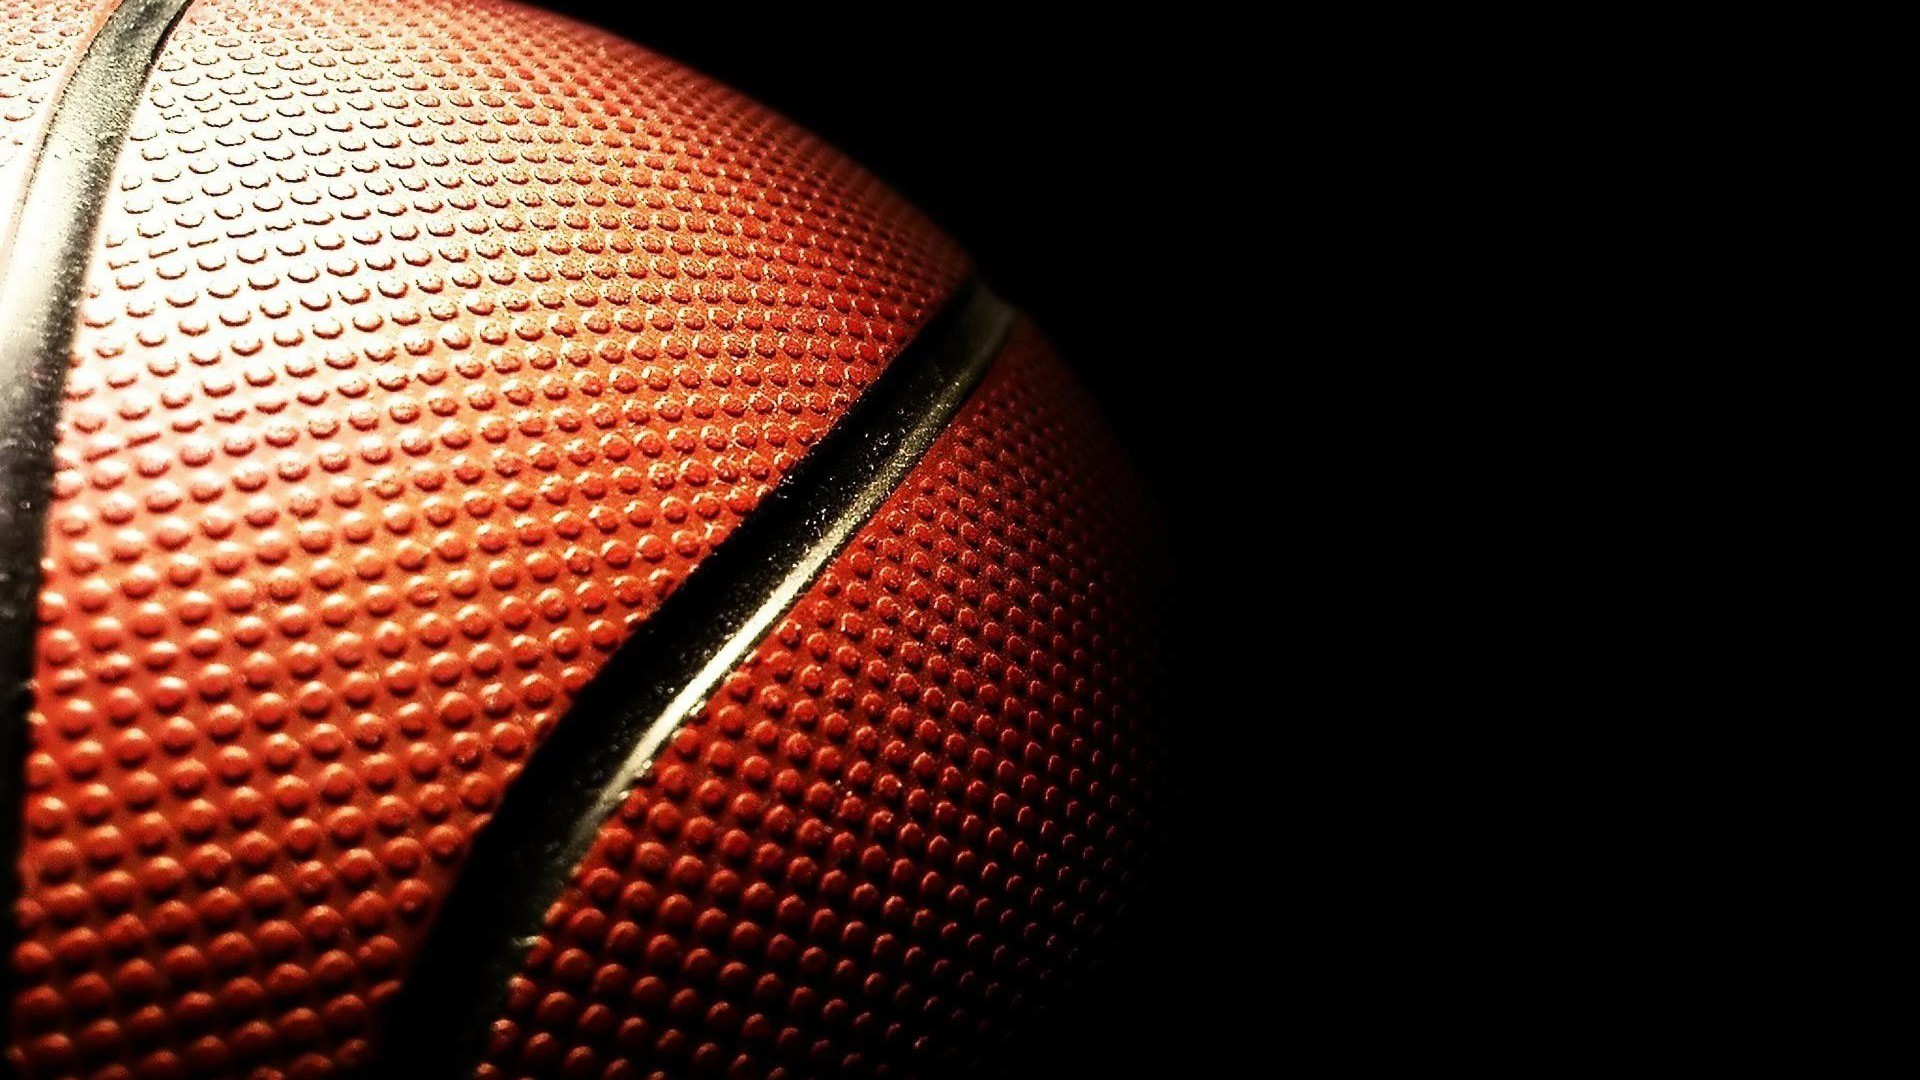 HD Basketball Games Wallpapers with image dimensions 1920x1080 pixel. You can make this wallpaper for your Desktop Computer Backgrounds, Windows or Mac Screensavers, iPhone Lock screen, Tablet or Android and another Mobile Phone device